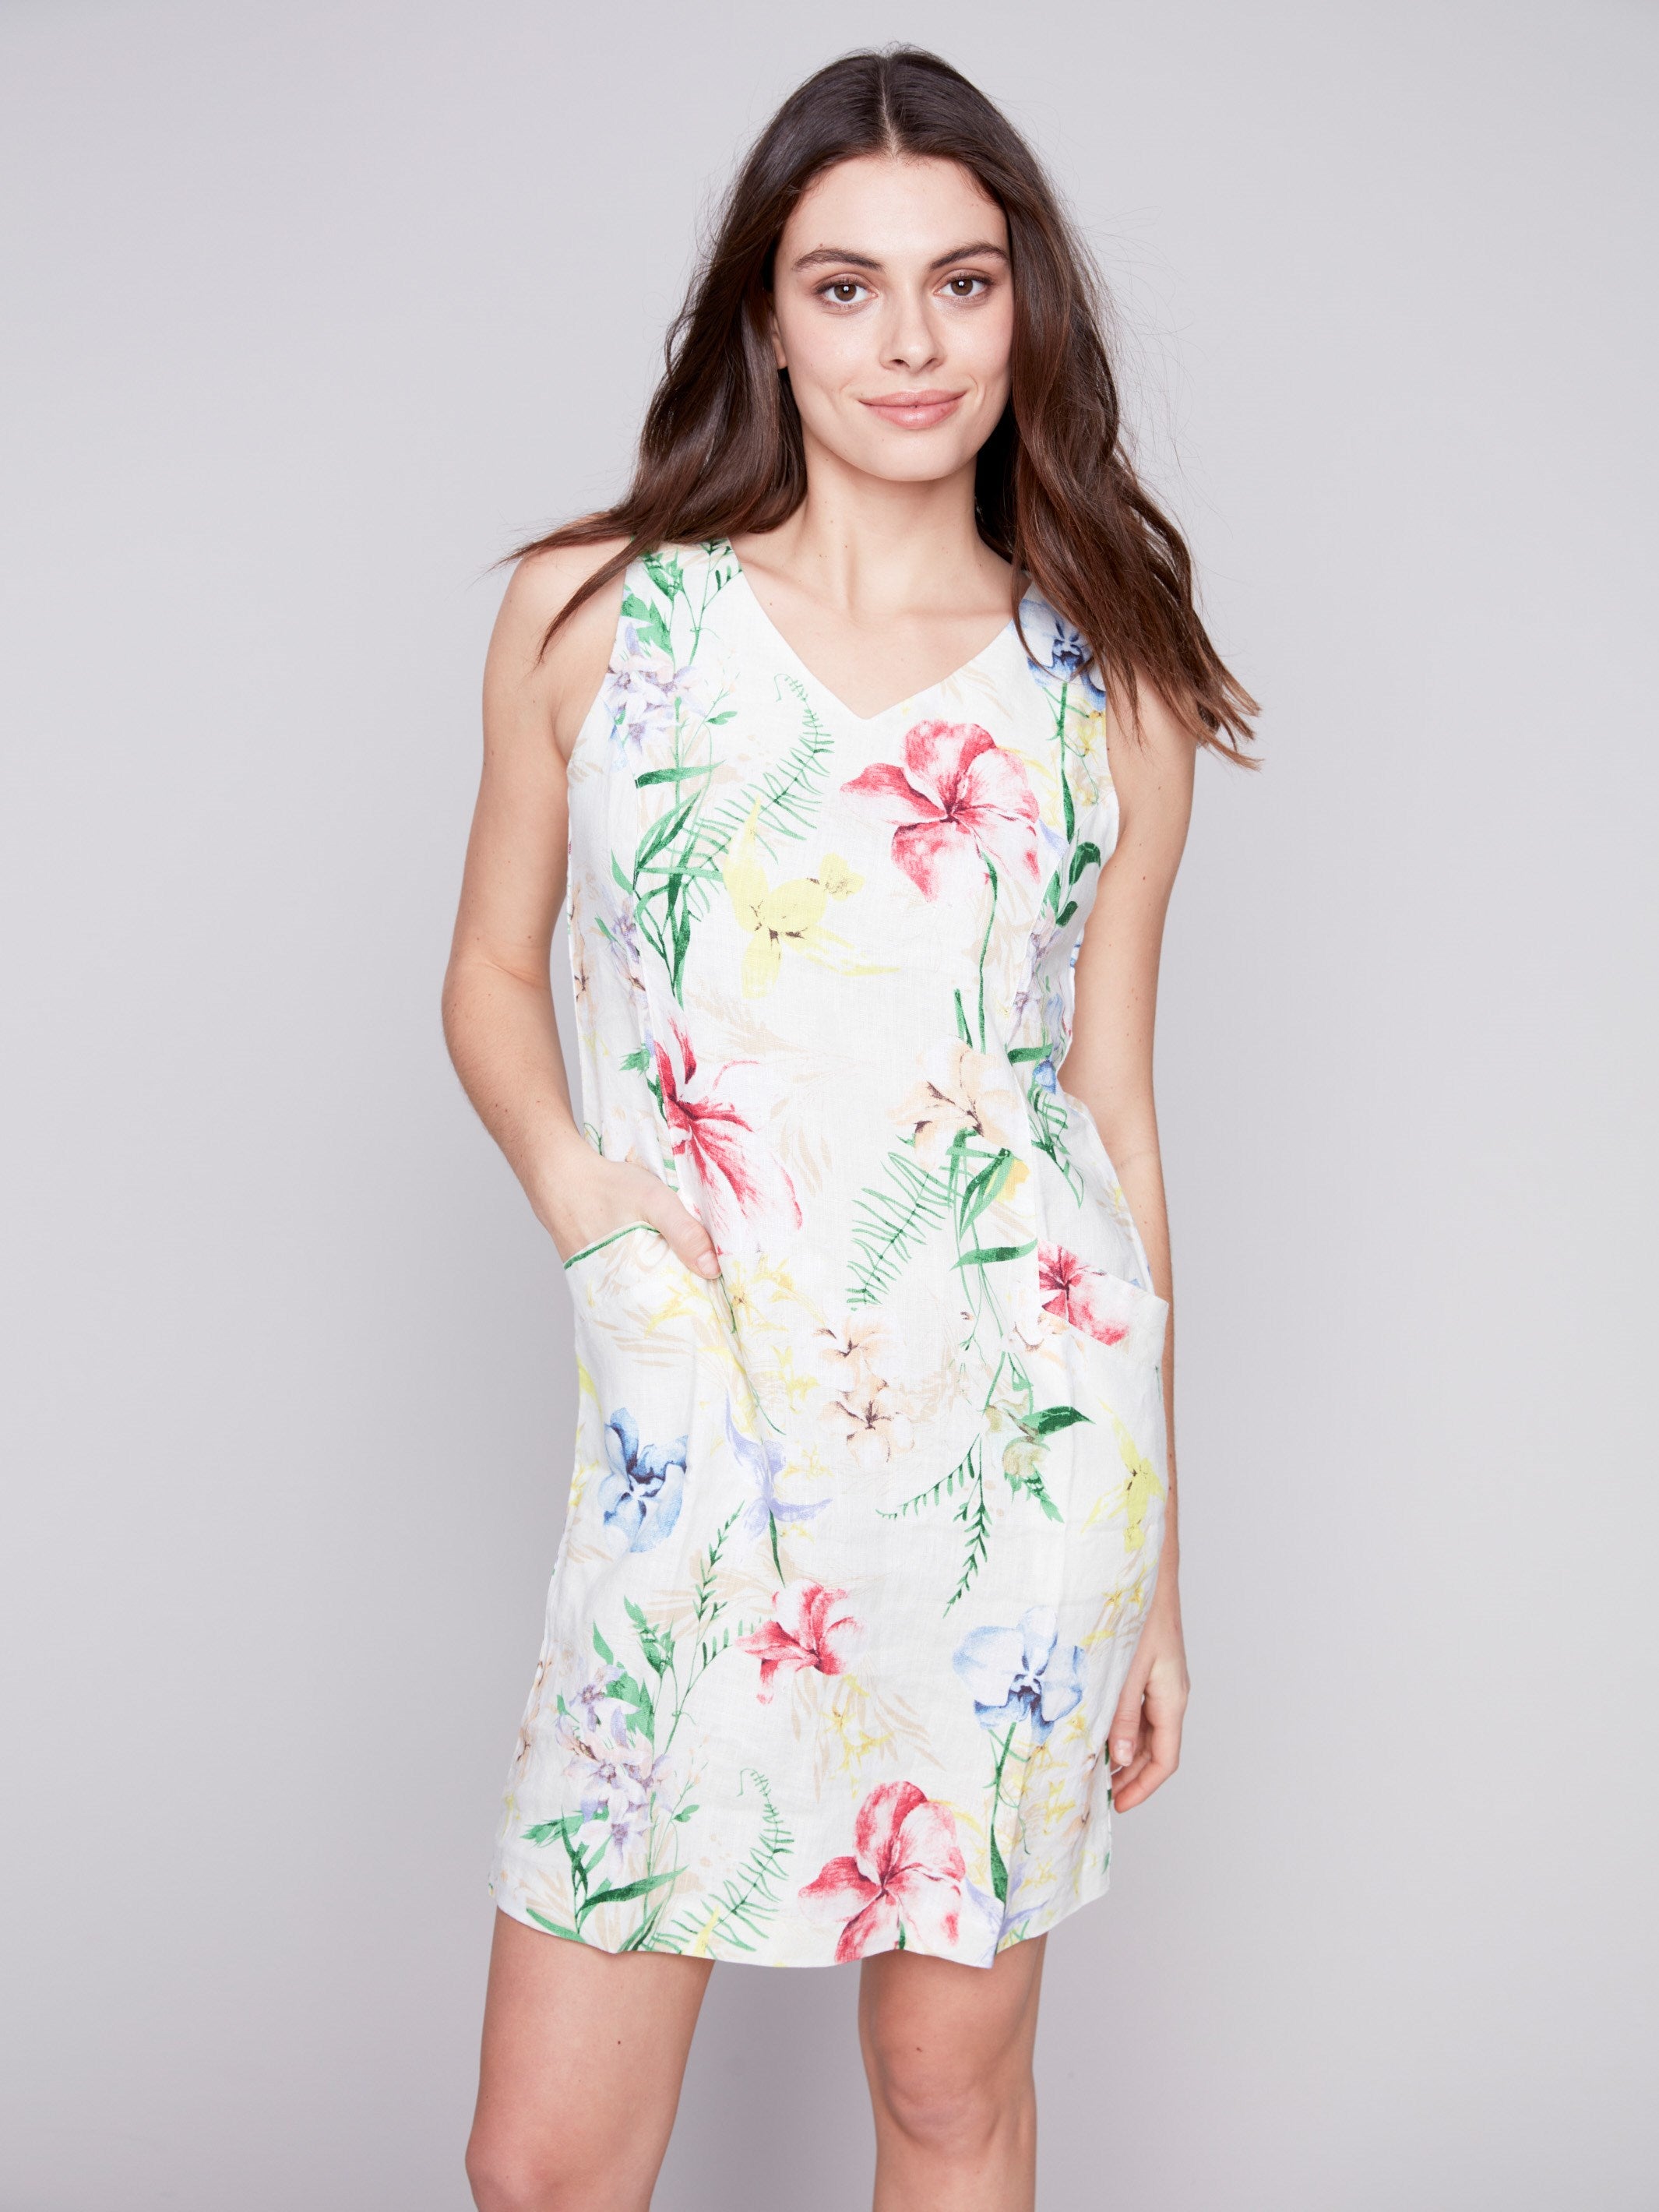 Sleeveless Printed Linen Dress - Wildflower - Charlie B Collection Canada - Image 4